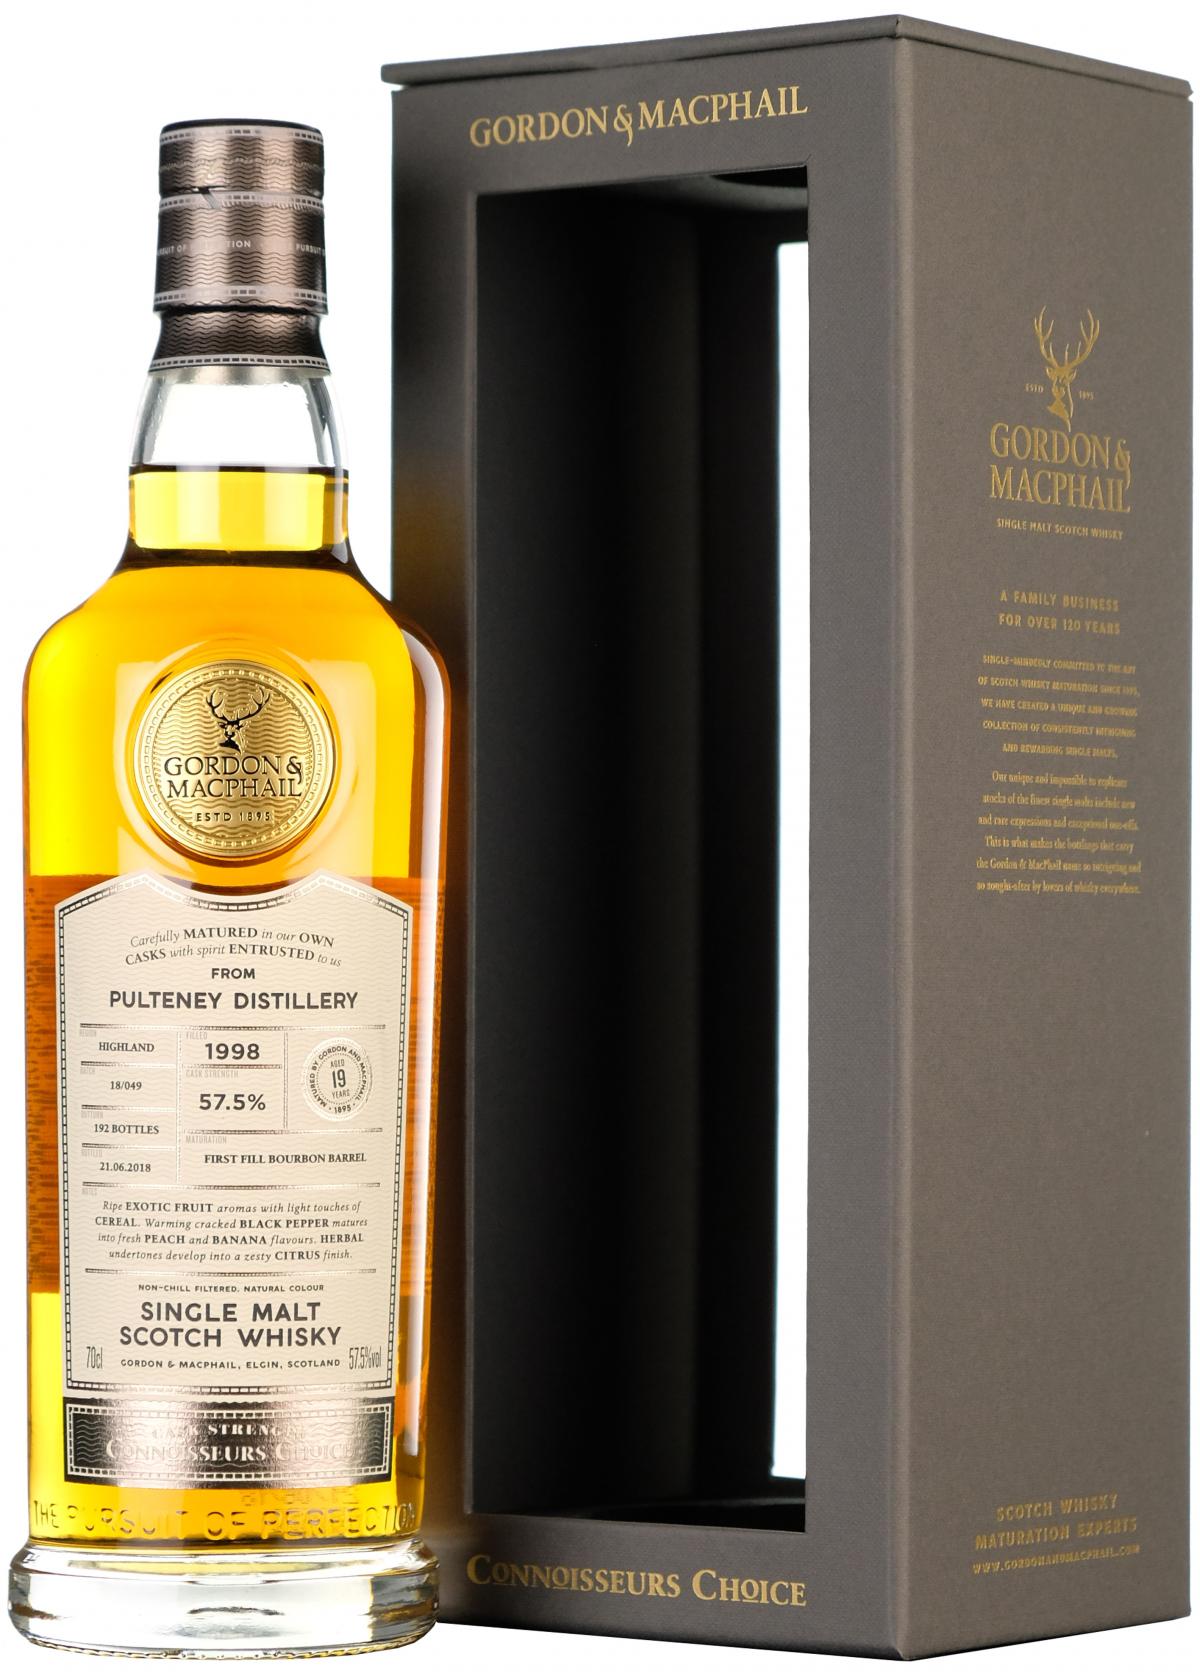 pultney 1998 19 year old connoisseurs choice, cask strength, gordon and macphail highland single malt scotch whisky whiskey